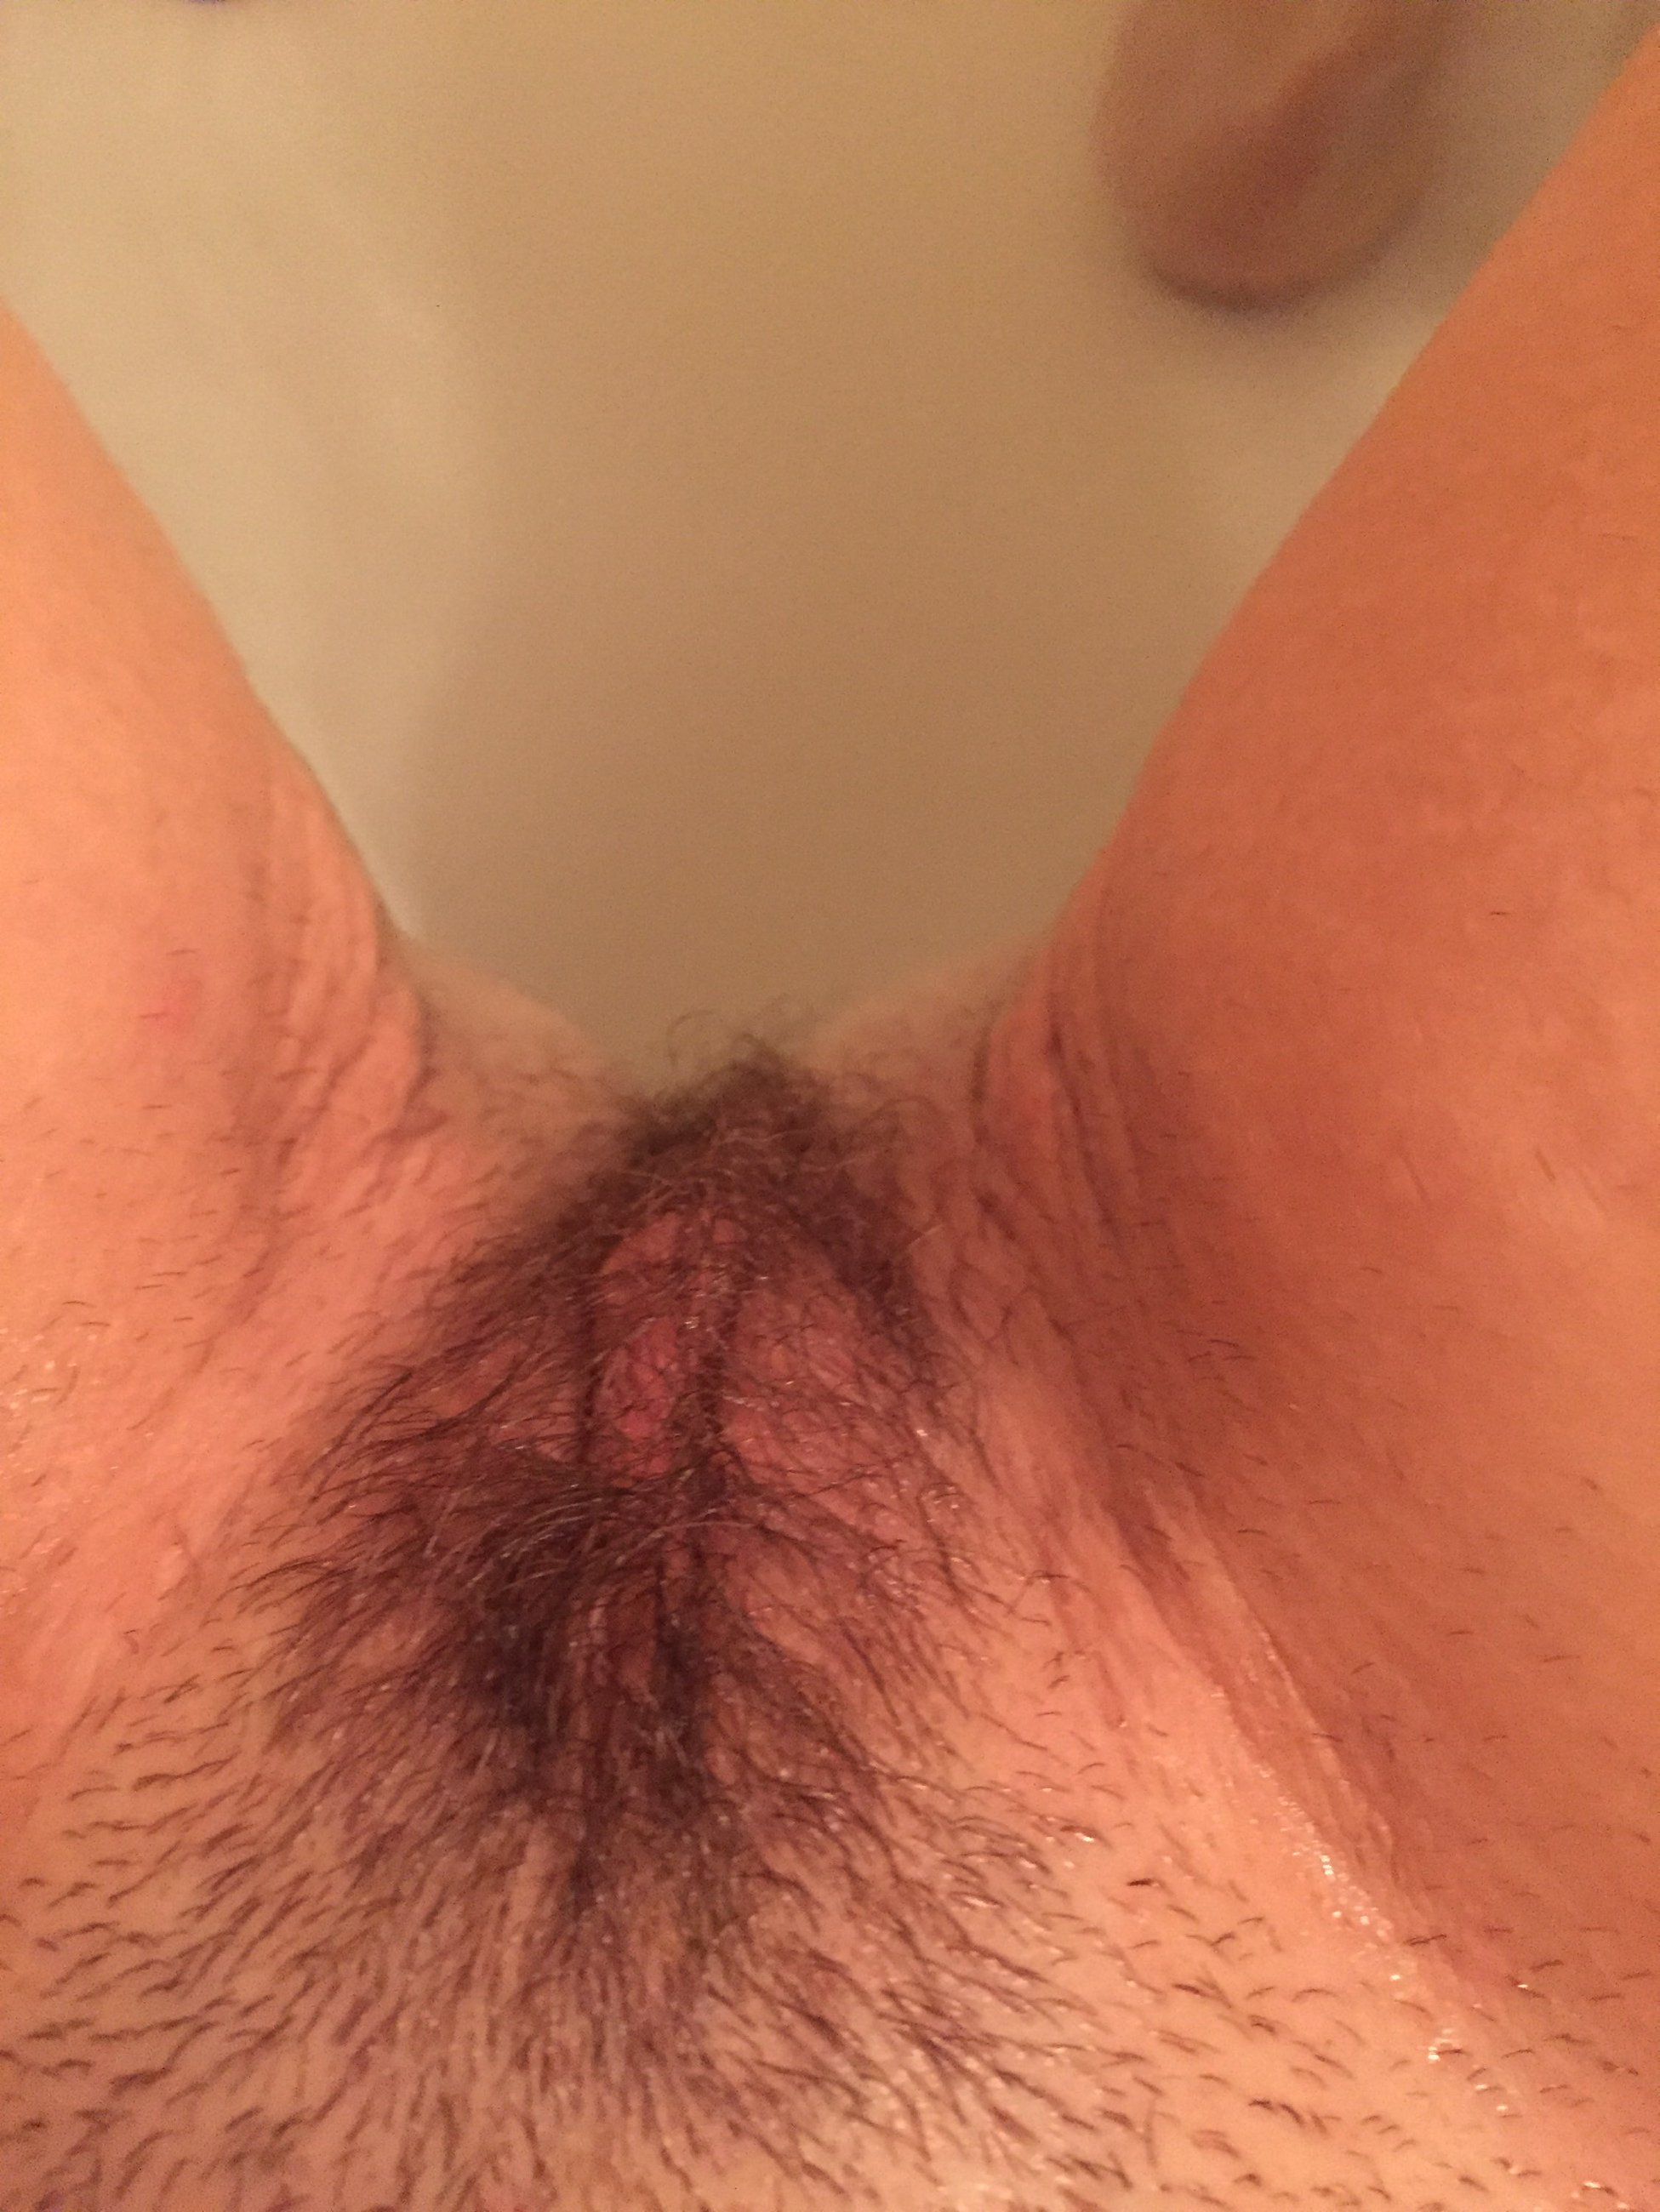 Wifes Hairy Pussy From Behind - Wifes hairy pussy Porn Pic - EPORNER